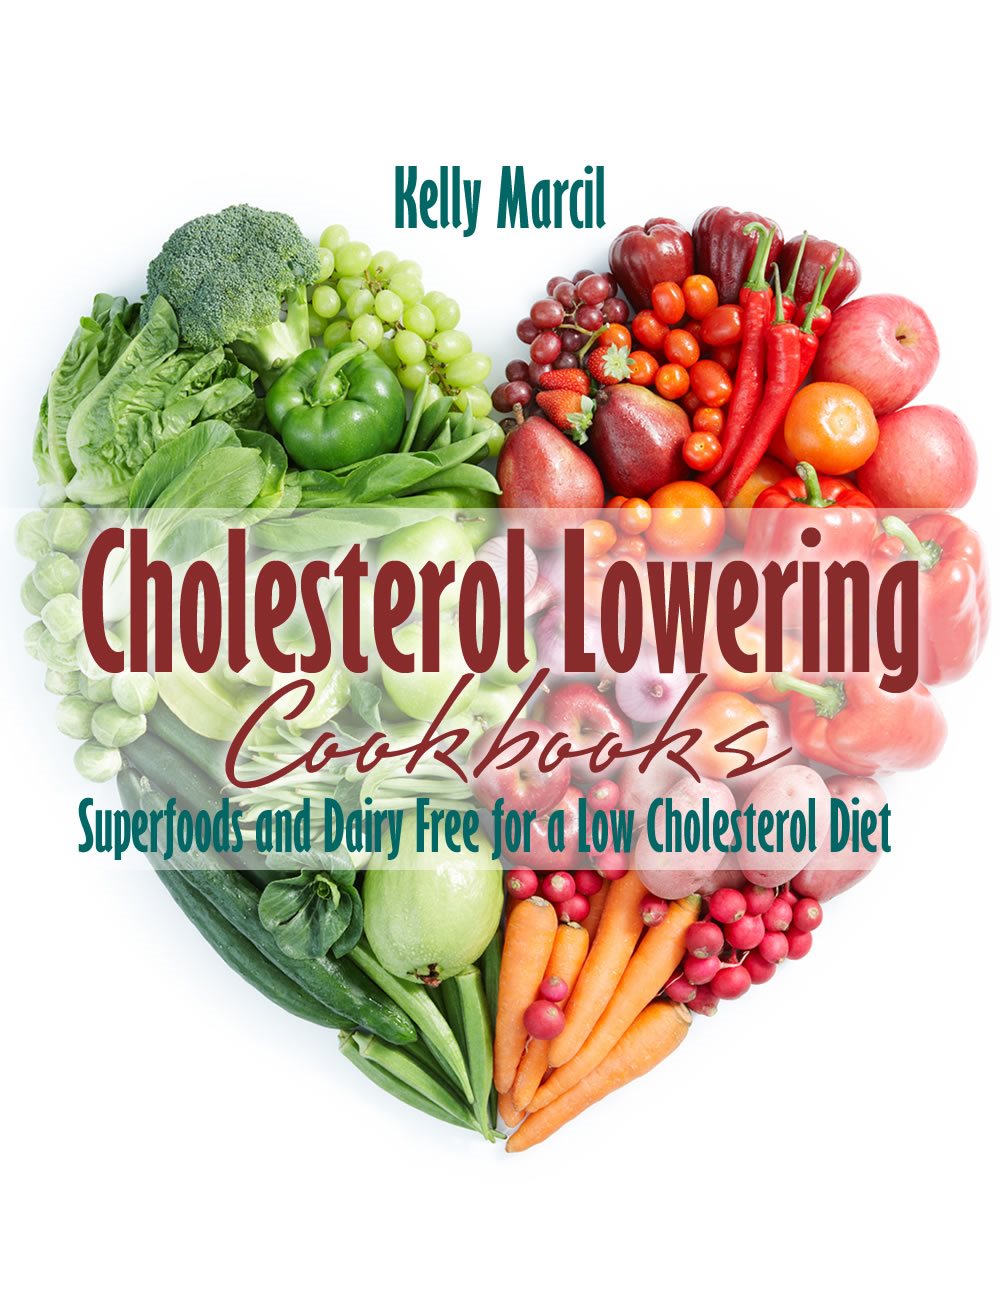 Table of Contents Cholesterol Lowering Cookbooks Superfoods and Dairy Free - photo 1